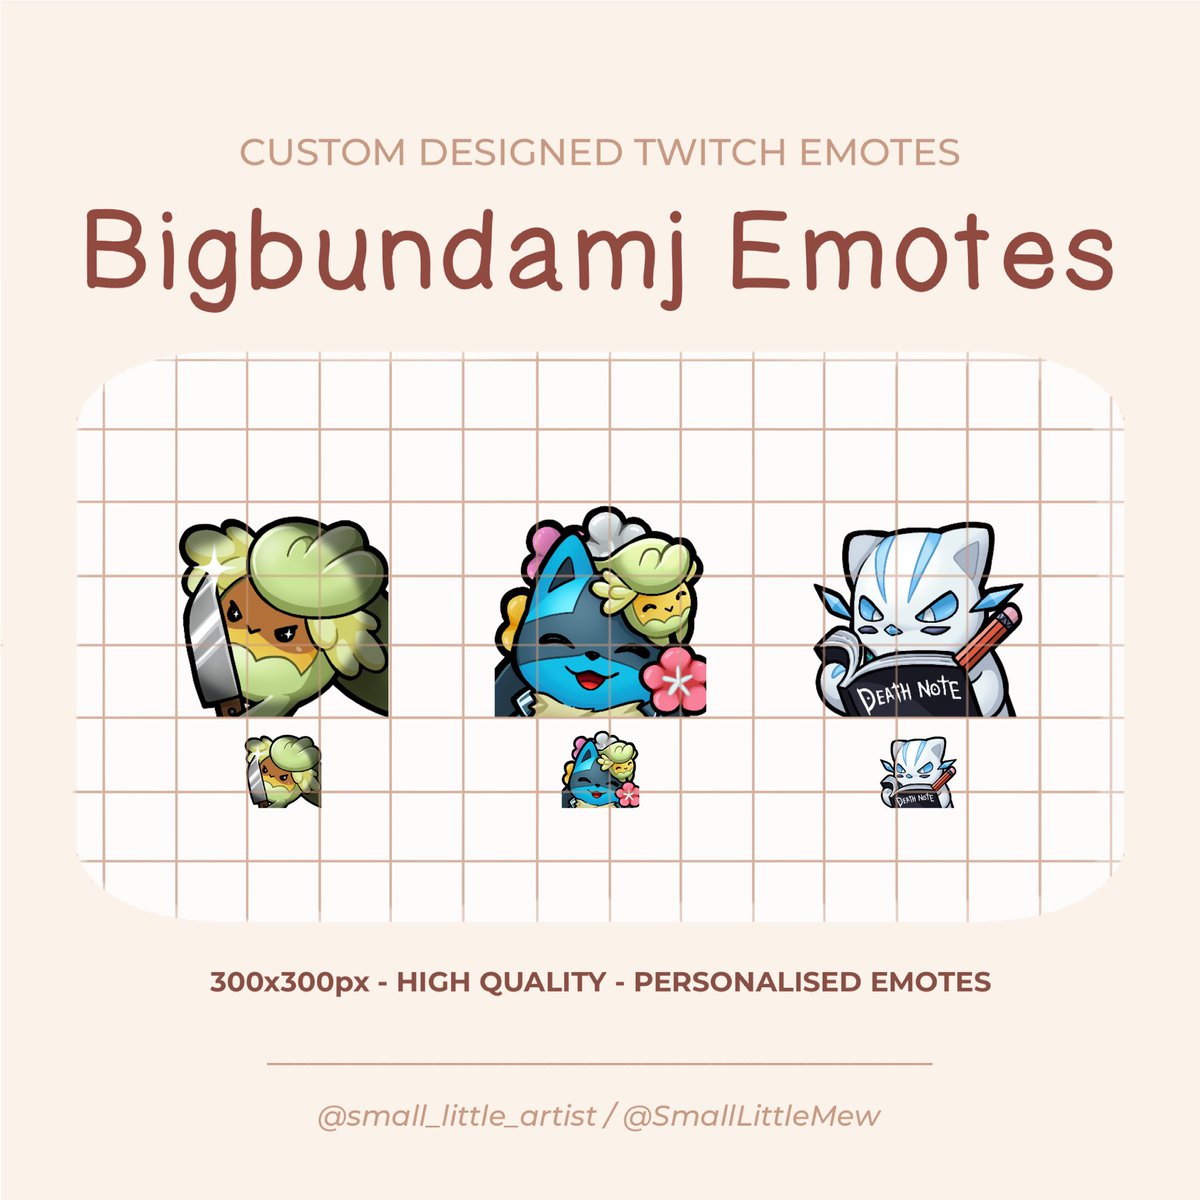 Another emote commission I finished last week! 🥰 Thank you so much to @bigbundamj for commissioning me, and good luck with the streaming! 🥰

#emotecommission #emote #commission #twitchemote #emoteartist #customemote #chibiemote #chibi #anime